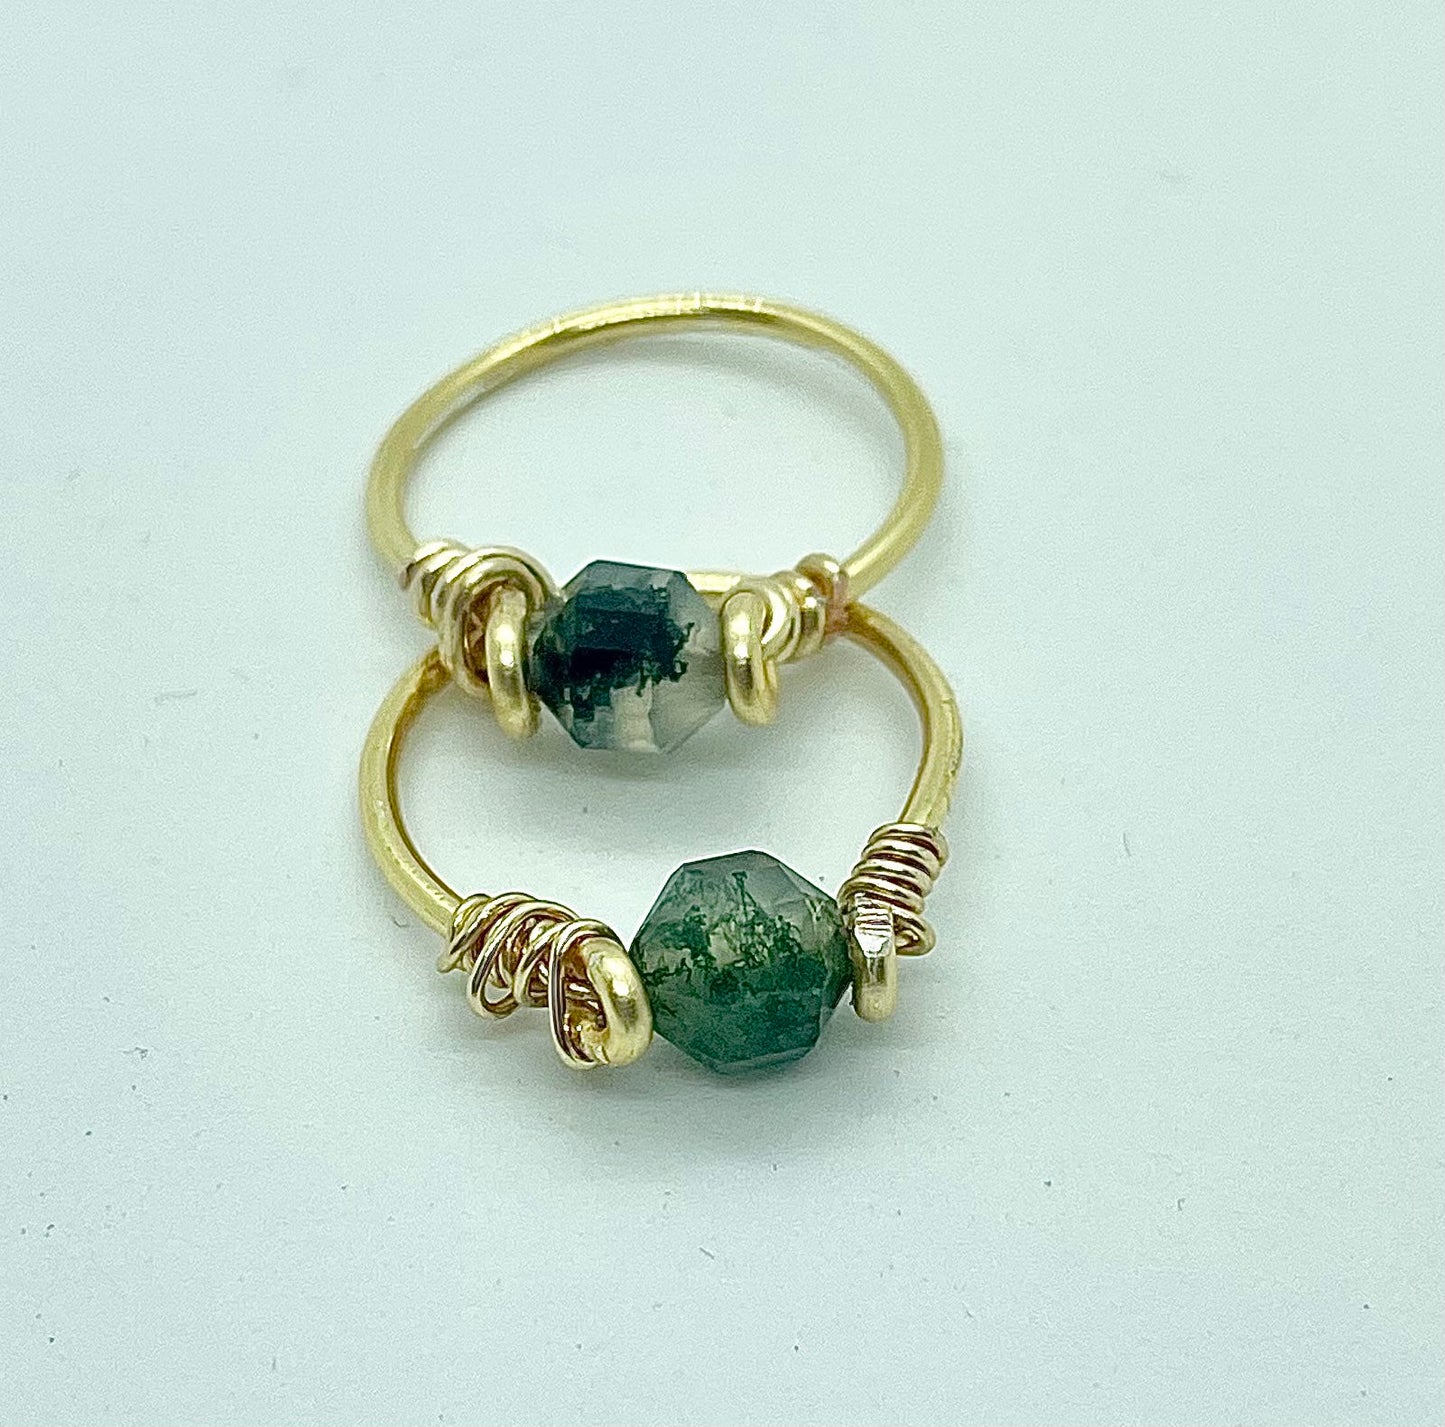 Moss Agate Ring, Forestcore Fairycore Jewelry Cottagecore Jewelry, Indie Jewelry, Goblincore Jewelry, Magical Forest Ring, Wire Wrapped Ring